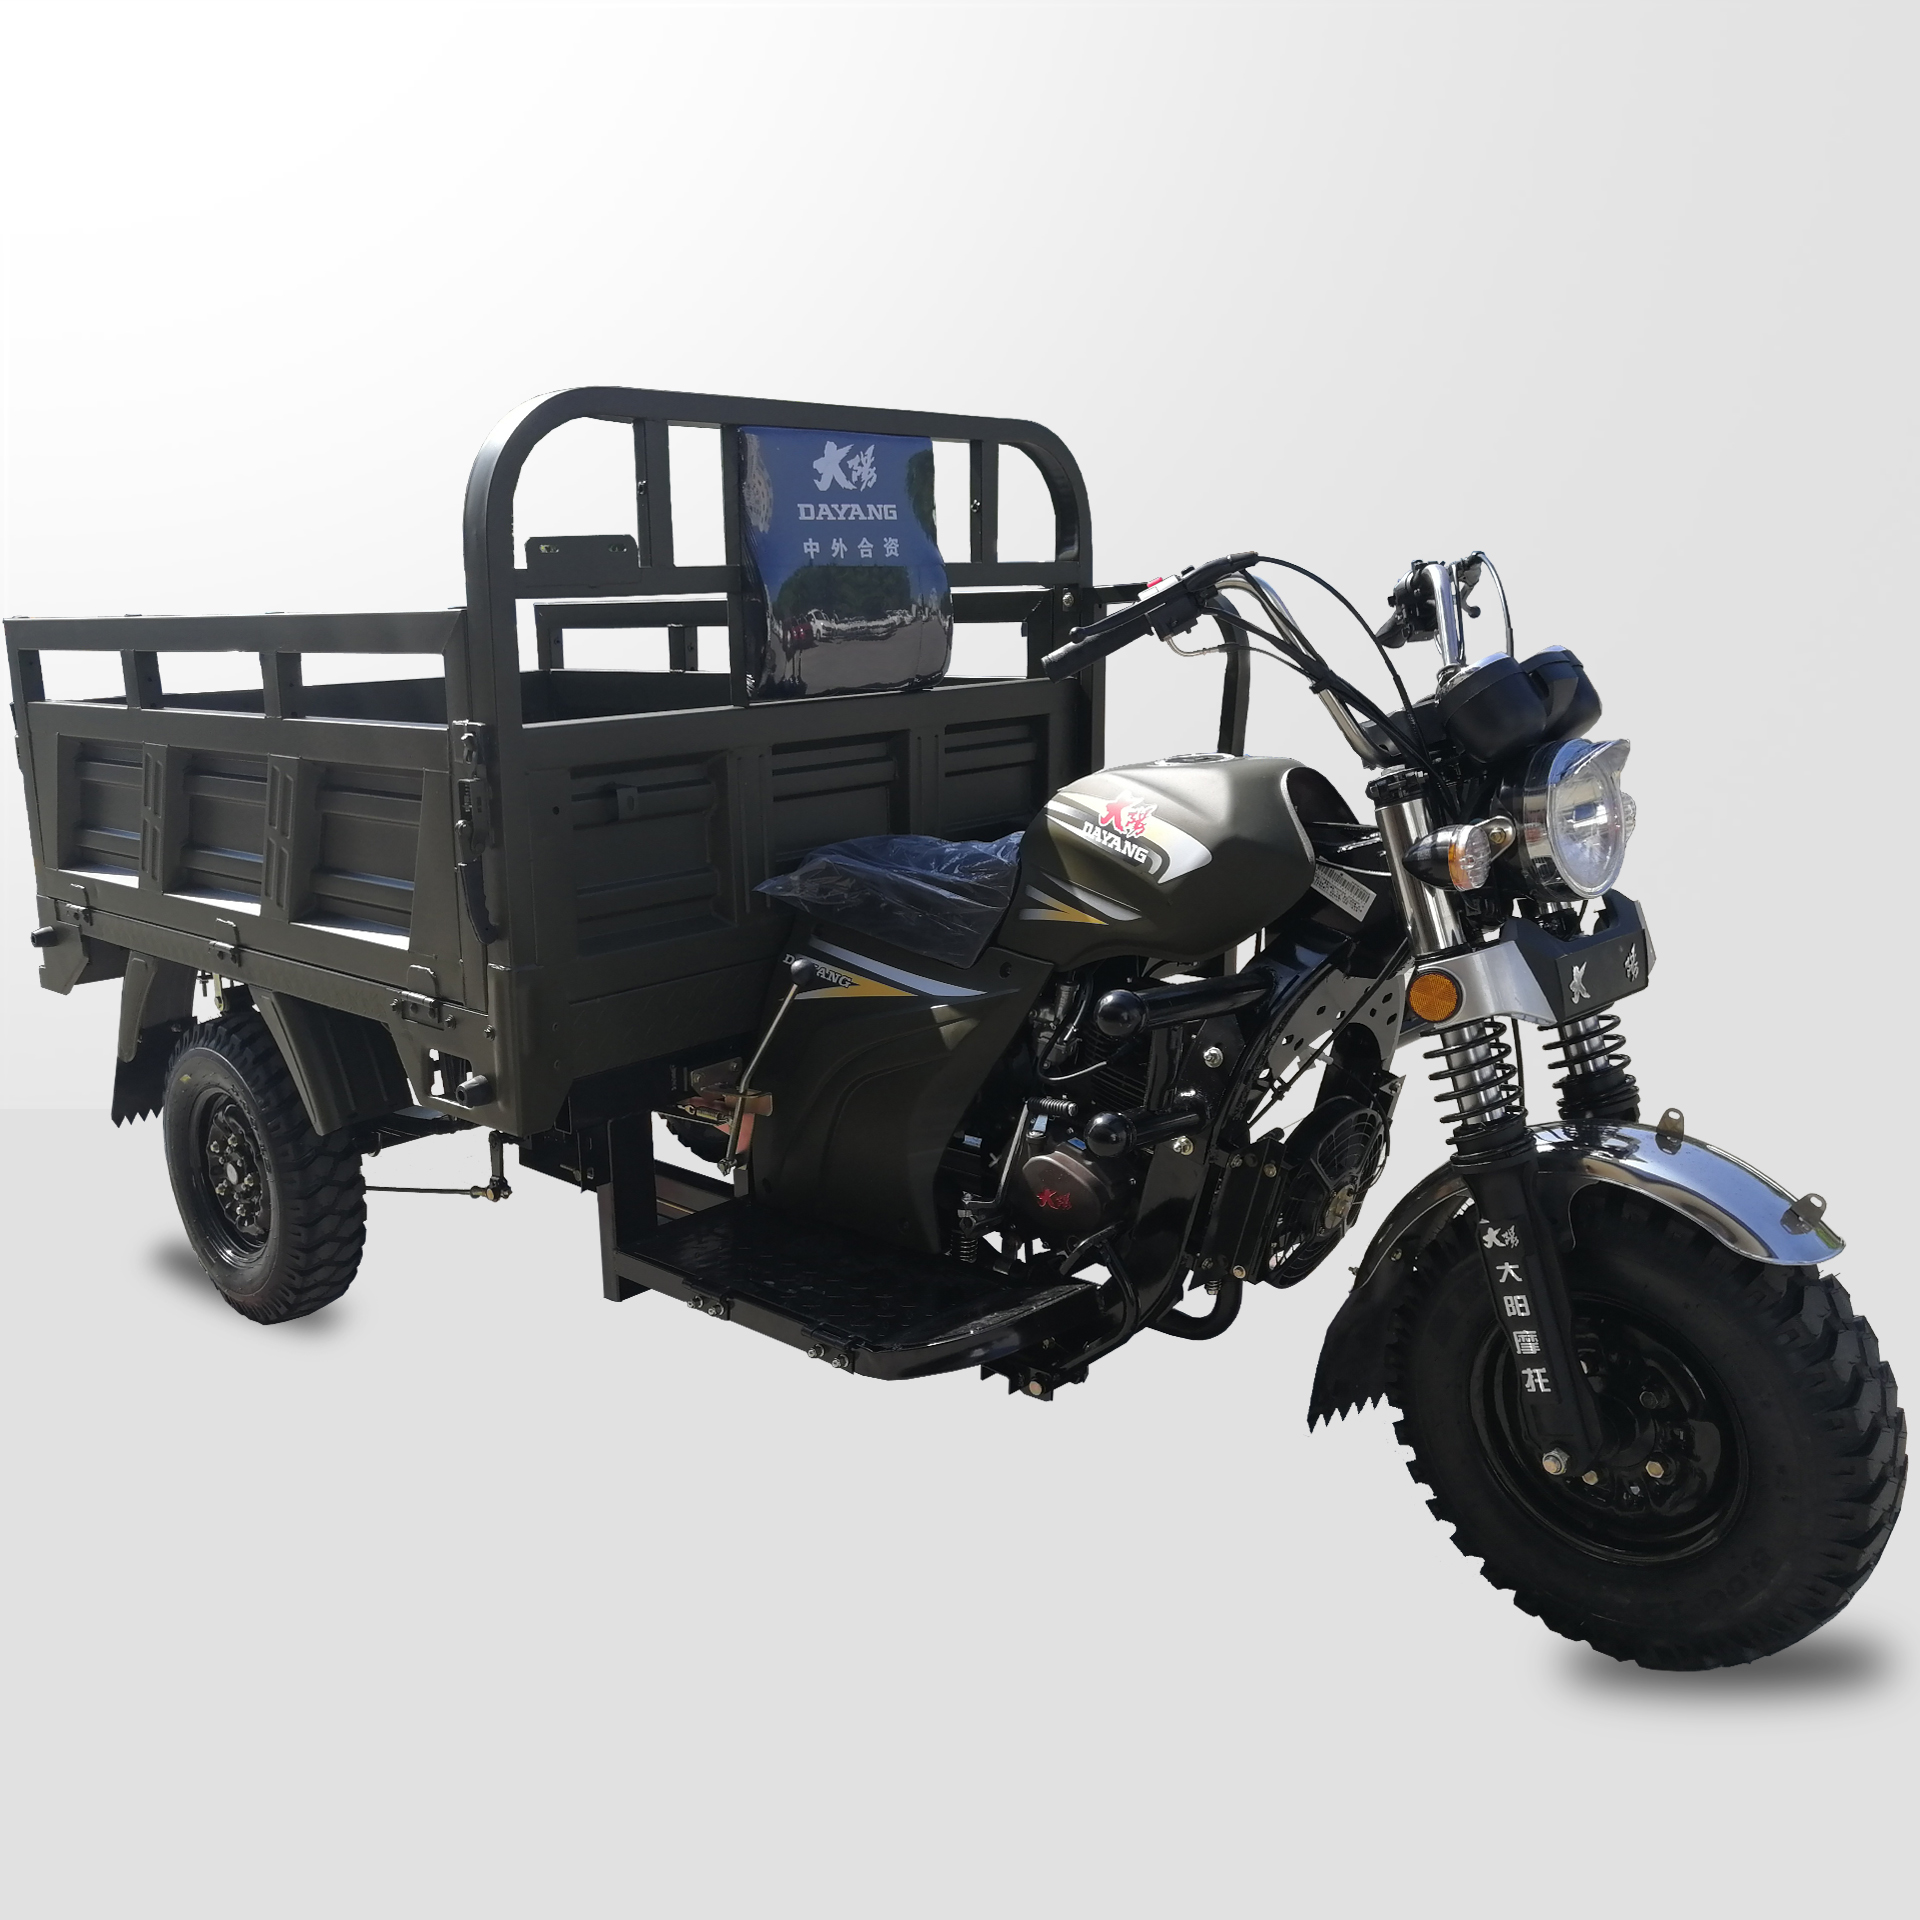 Hight Quality Light loading truck 175CC 200CC 250CC Motorcycle Tricycle 3 Wheel Cargo for Adult Origin Type Driving Size